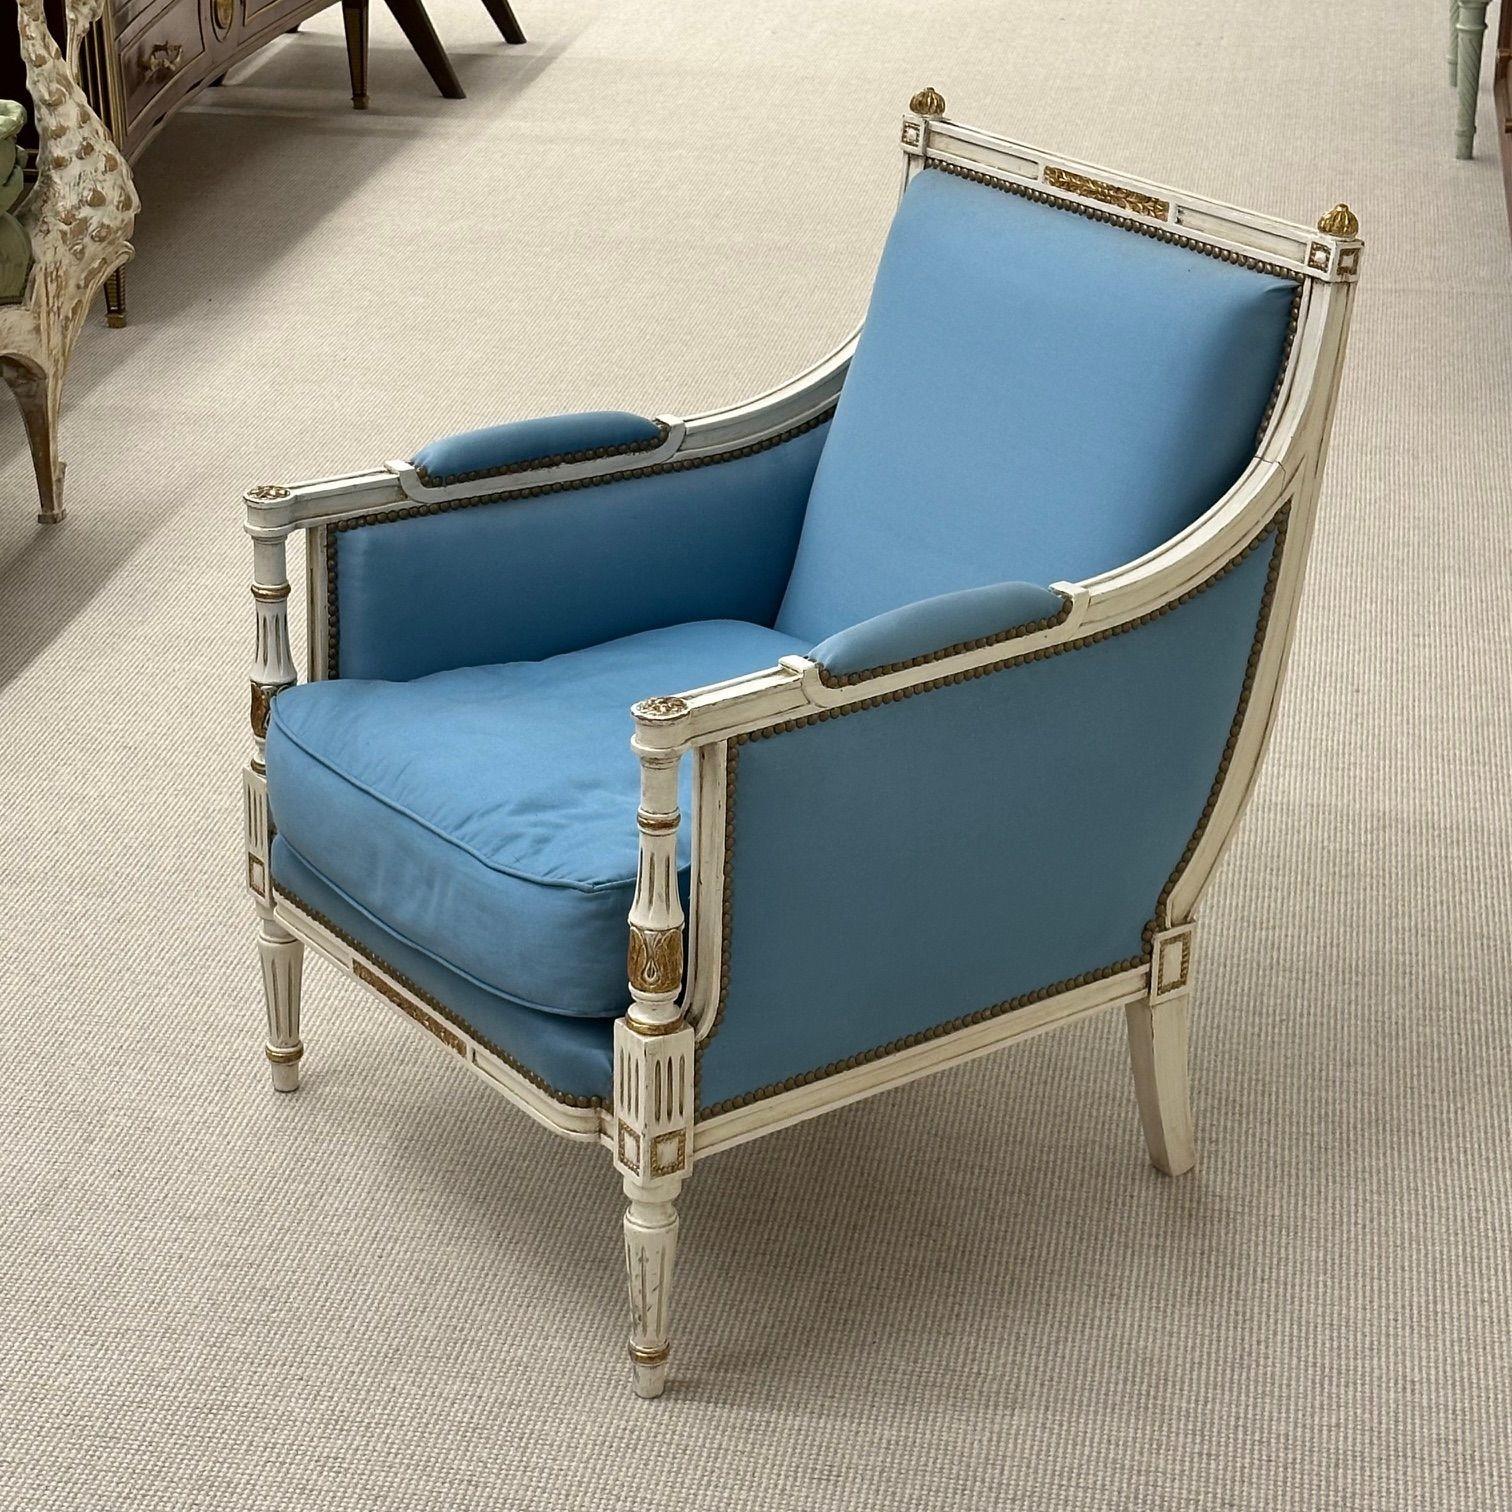 Louis XVI, French Arm Chair or Bergère, Painted Wood, Giltwood, Baby Blue Fabric, 1950s

A charming Louis XVI style paint decorated bergère. The frame features antique white painted wood and giltwood accents. Later soft baby blue upholstery. The